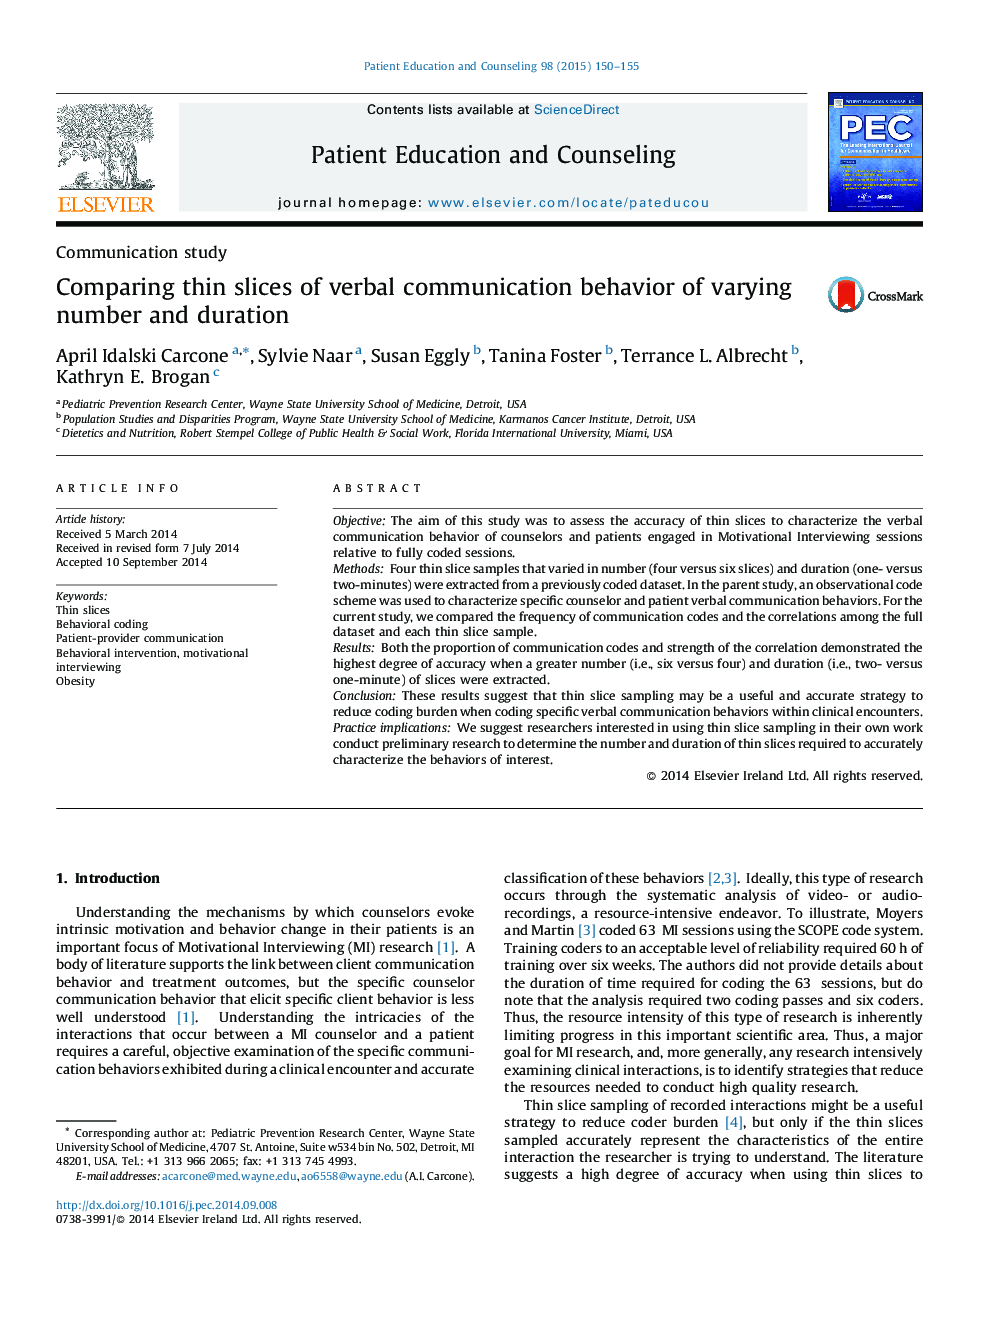 Comparing thin slices of verbal communication behavior of varying number and duration